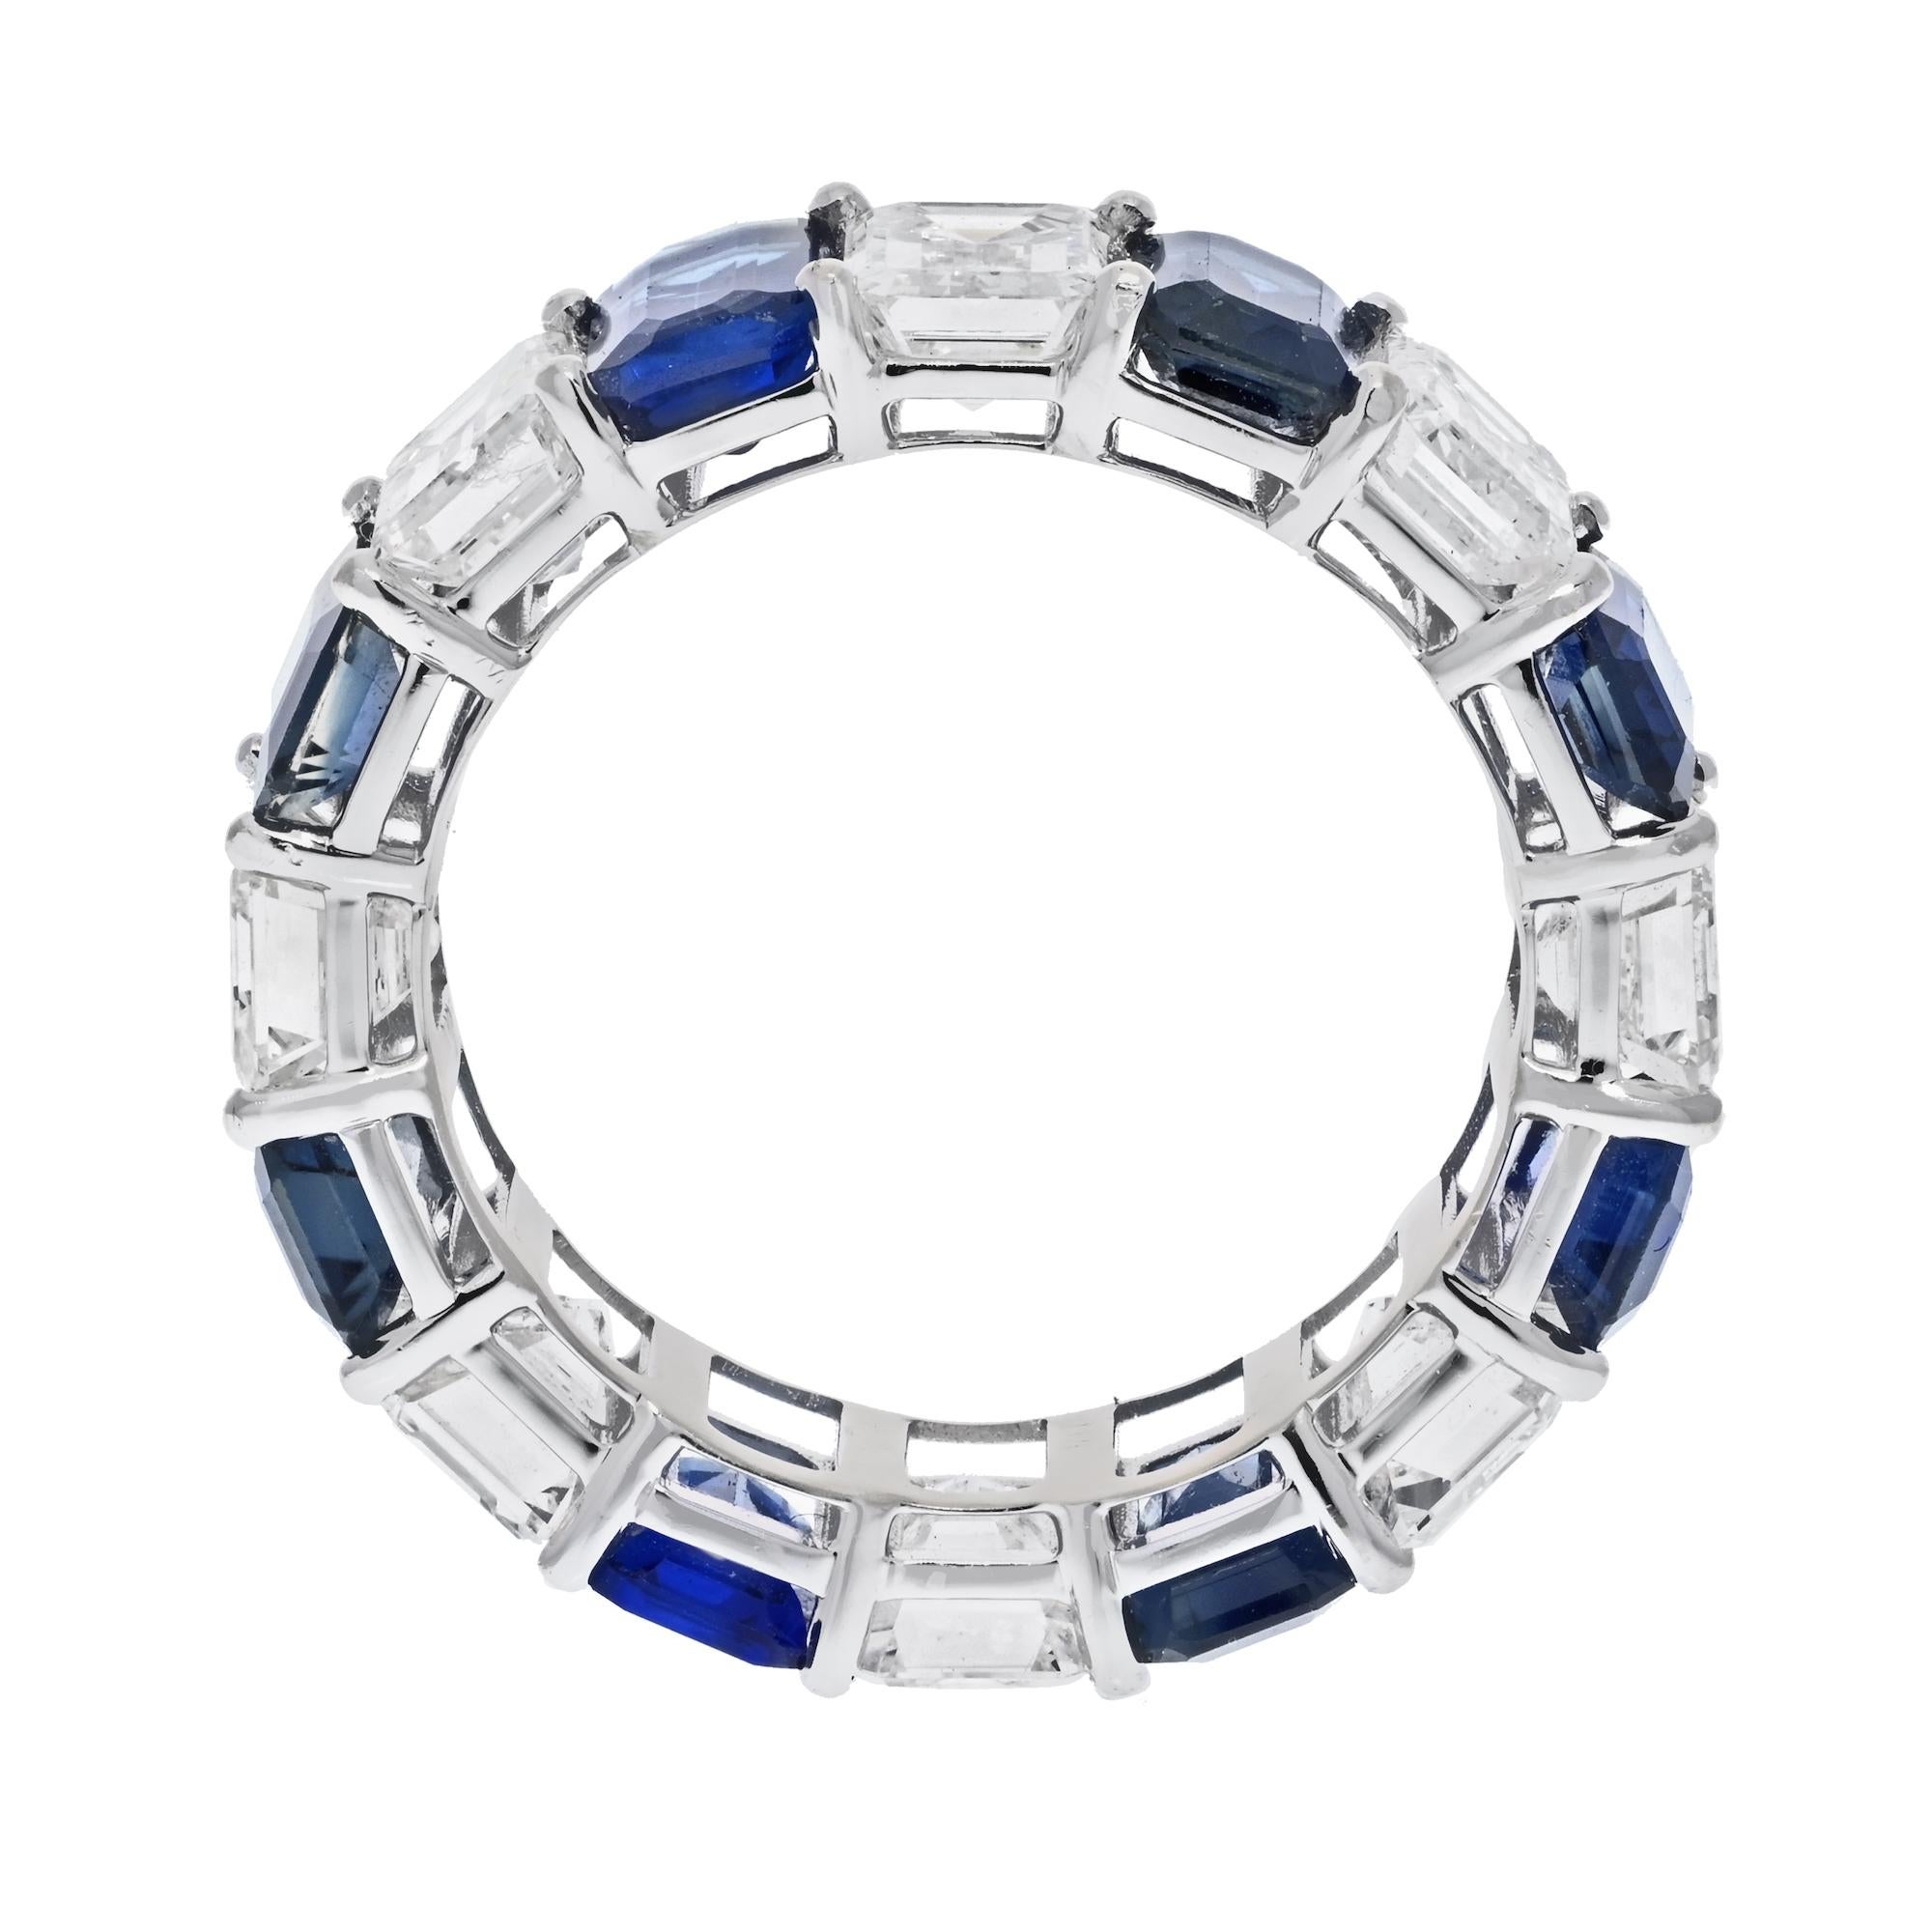 Alternating Sapphire and Diamond Eternity Band 9 Carats Total

Striking in color and style, this ring is comprised of 8 Emerald cut diamonds alternating with 8 majestic Blue Sapphires creating a magnificent piece of art. Wear this eternity band day